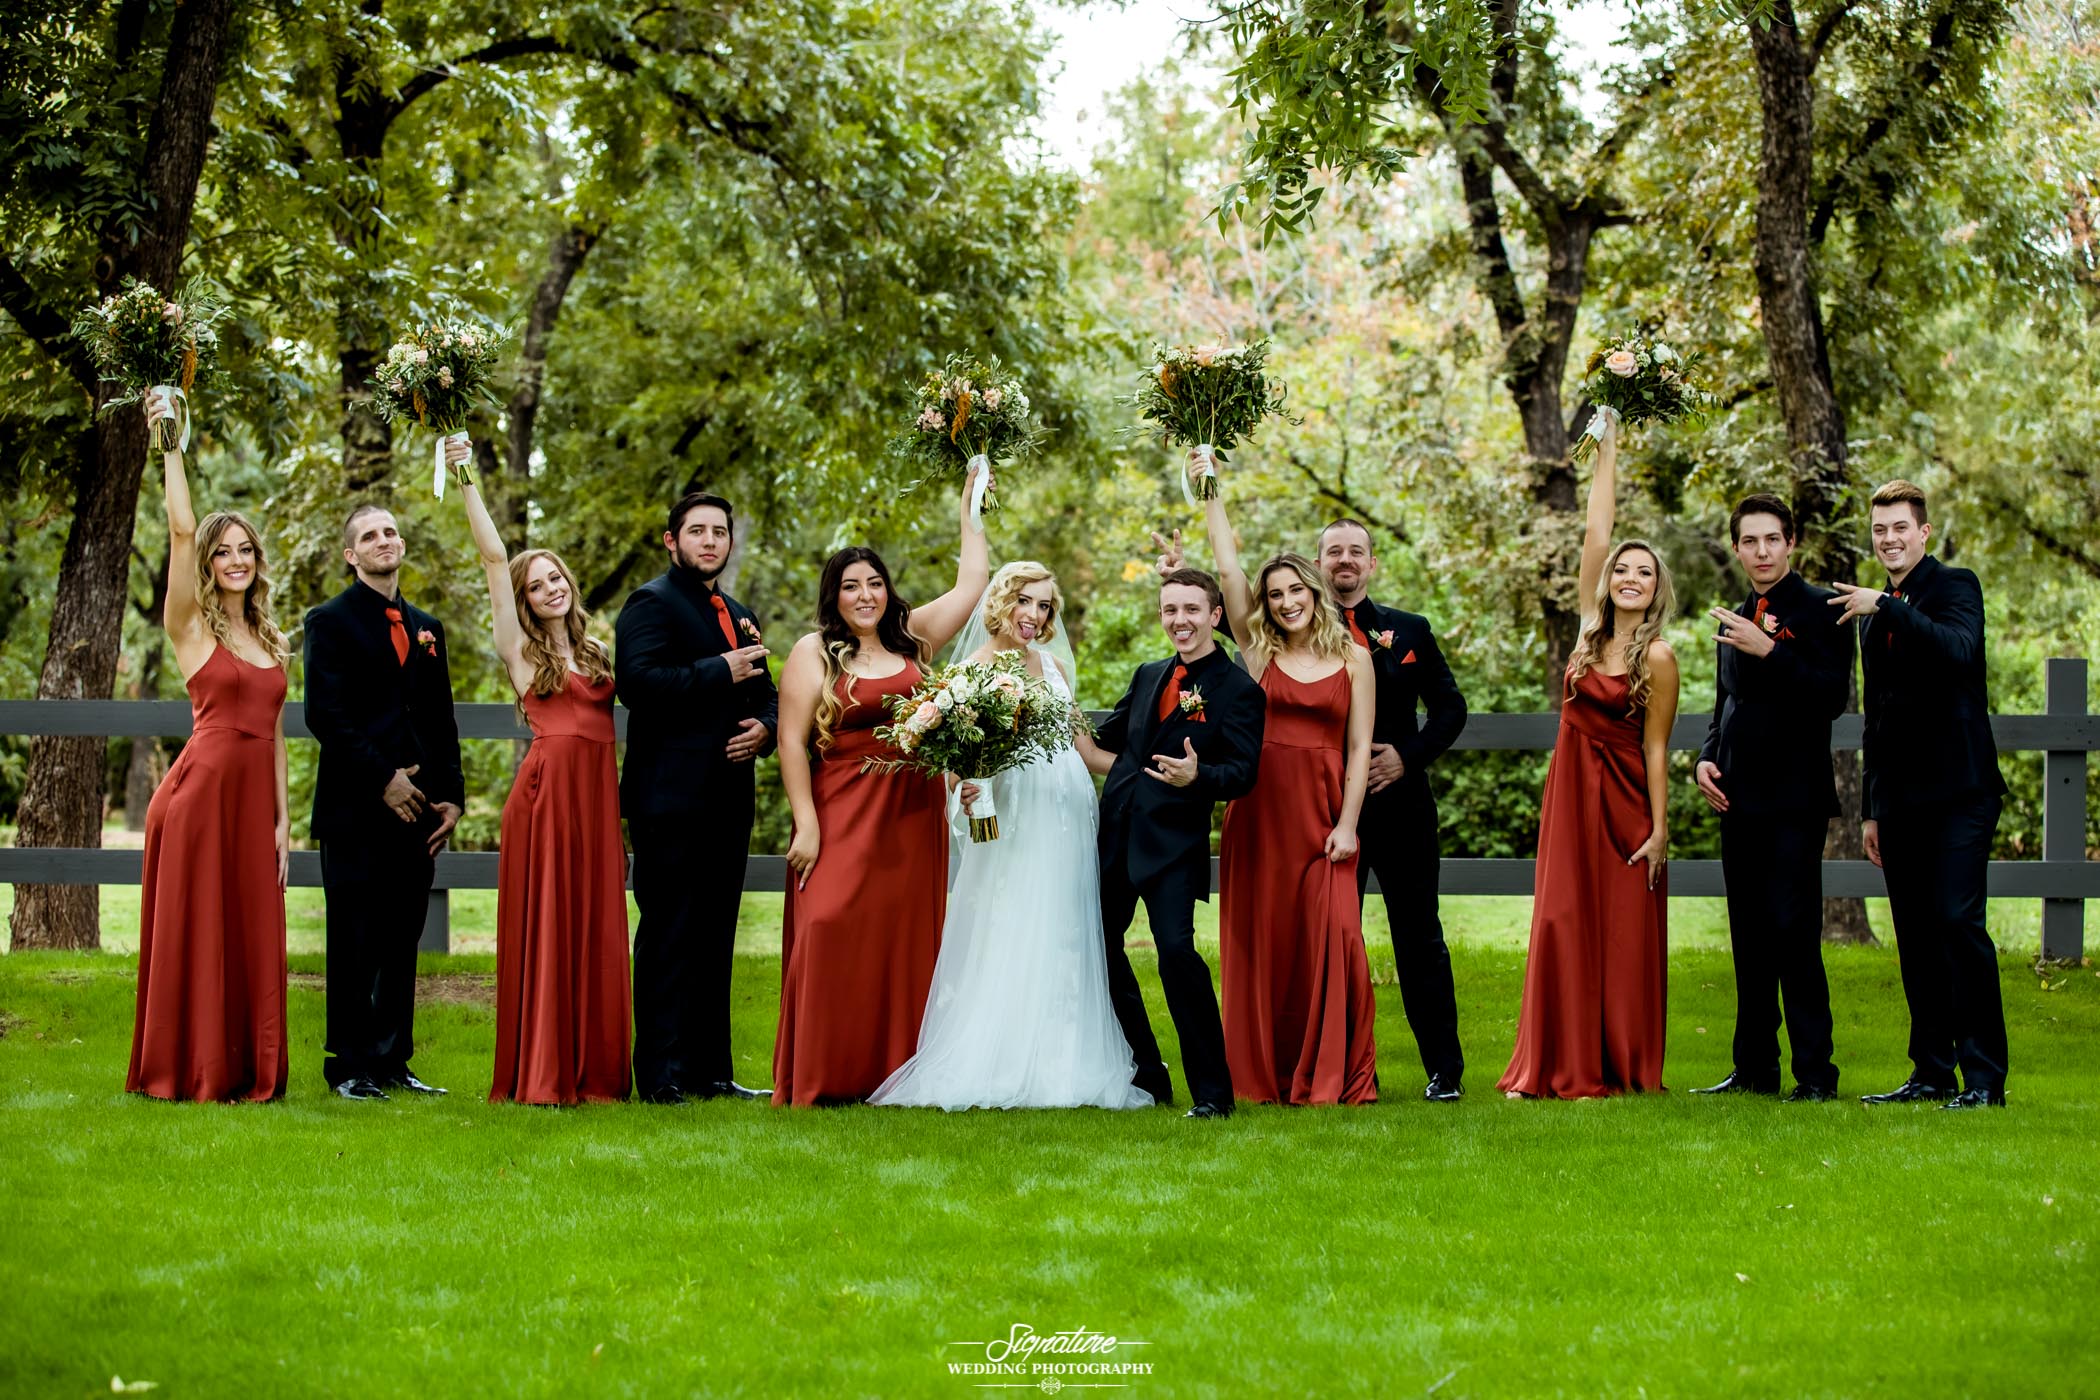 Bride and groom with wedding party fun pose outside